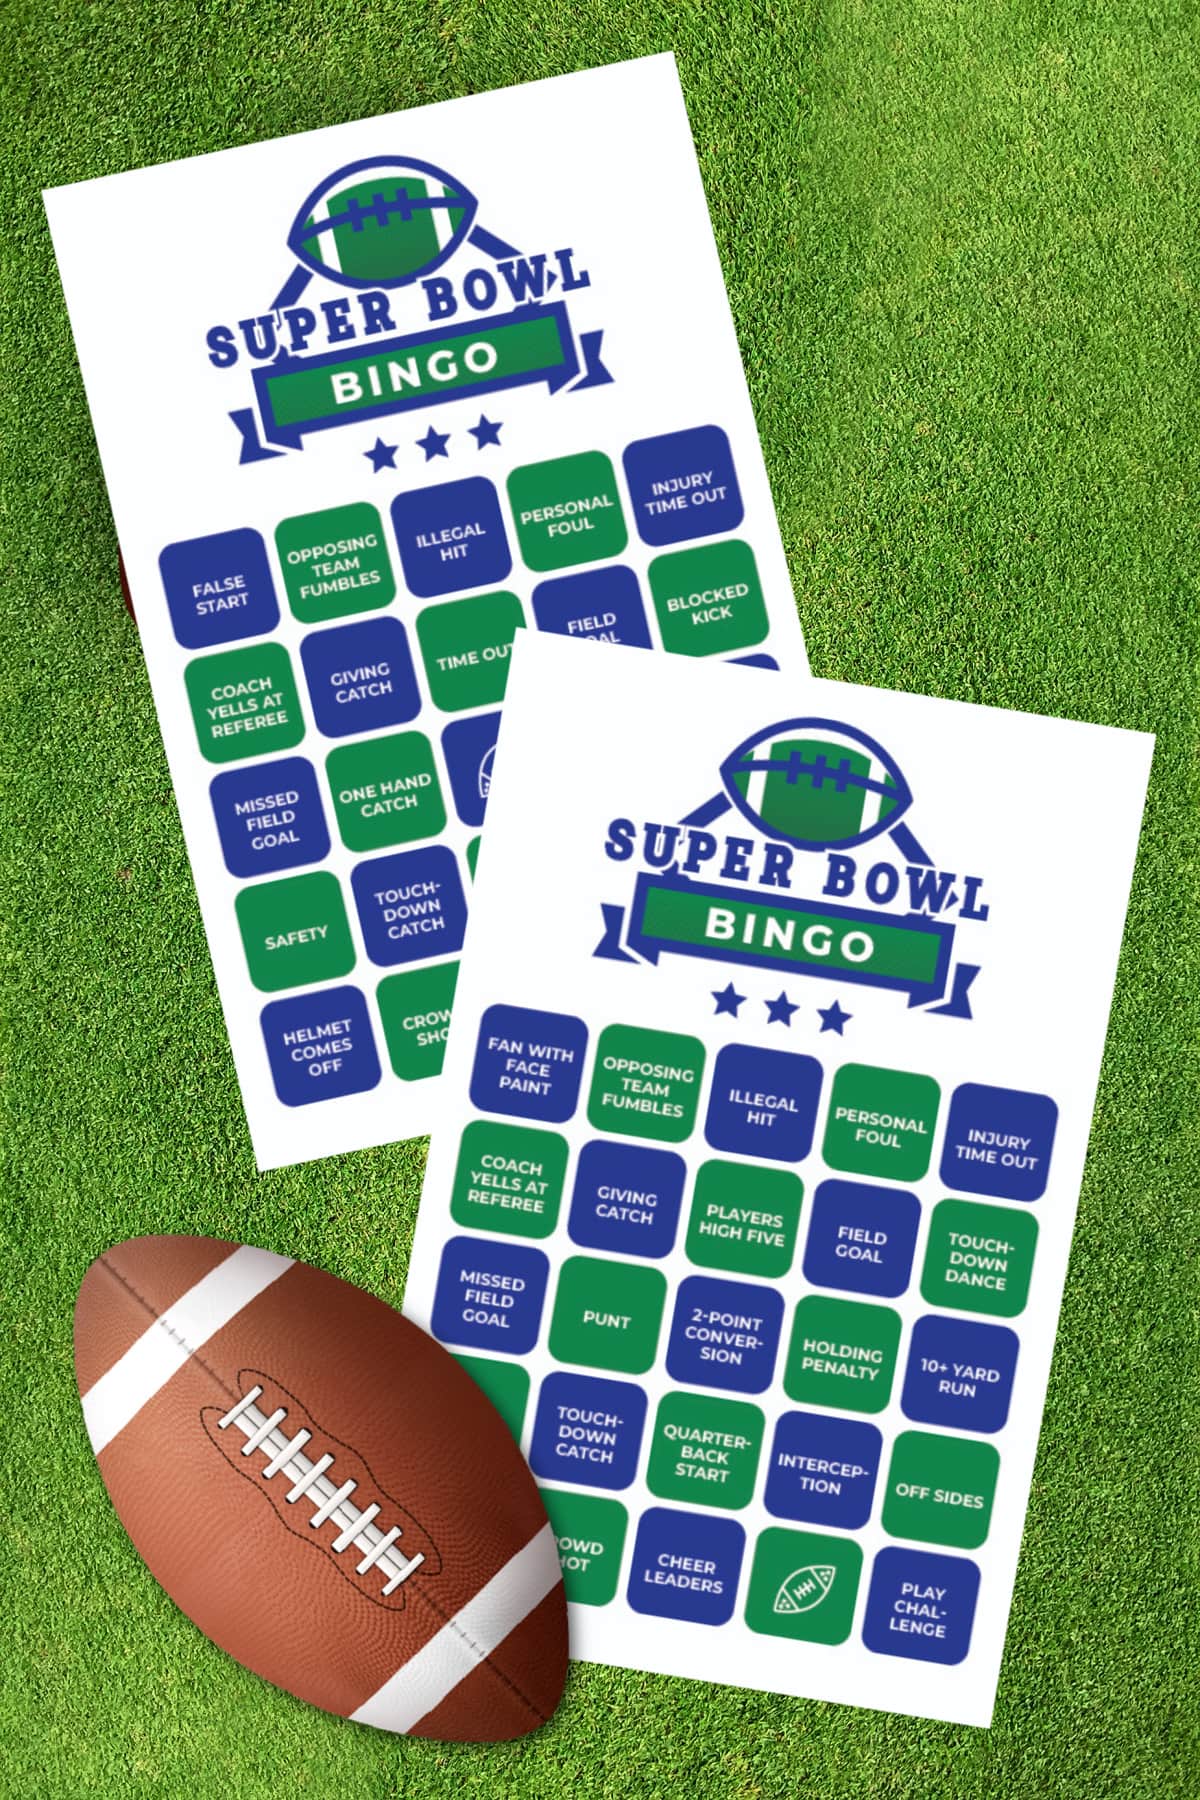 Super Bowl Bingo Cards with green background